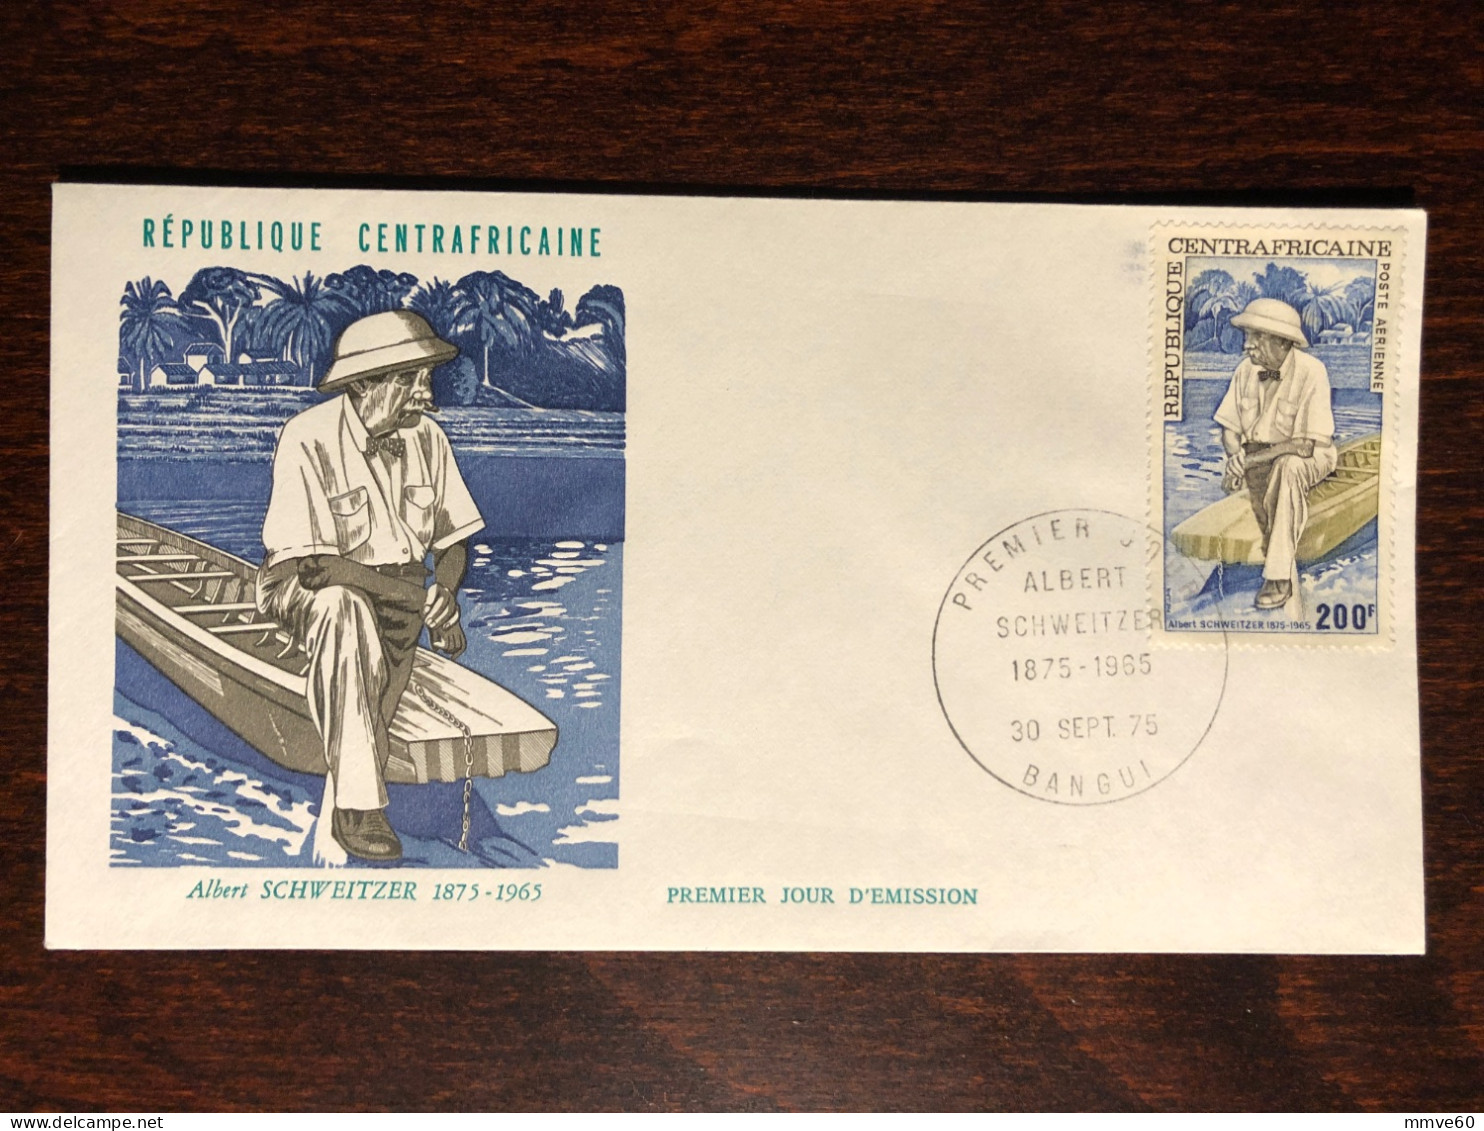 CENTRAFRICAINE  CENTRAL AFRICA FDC COVER 1975 YEAR  SCHWEITZER HEALTH MEDICINE STAMPS - Repubblica Centroafricana